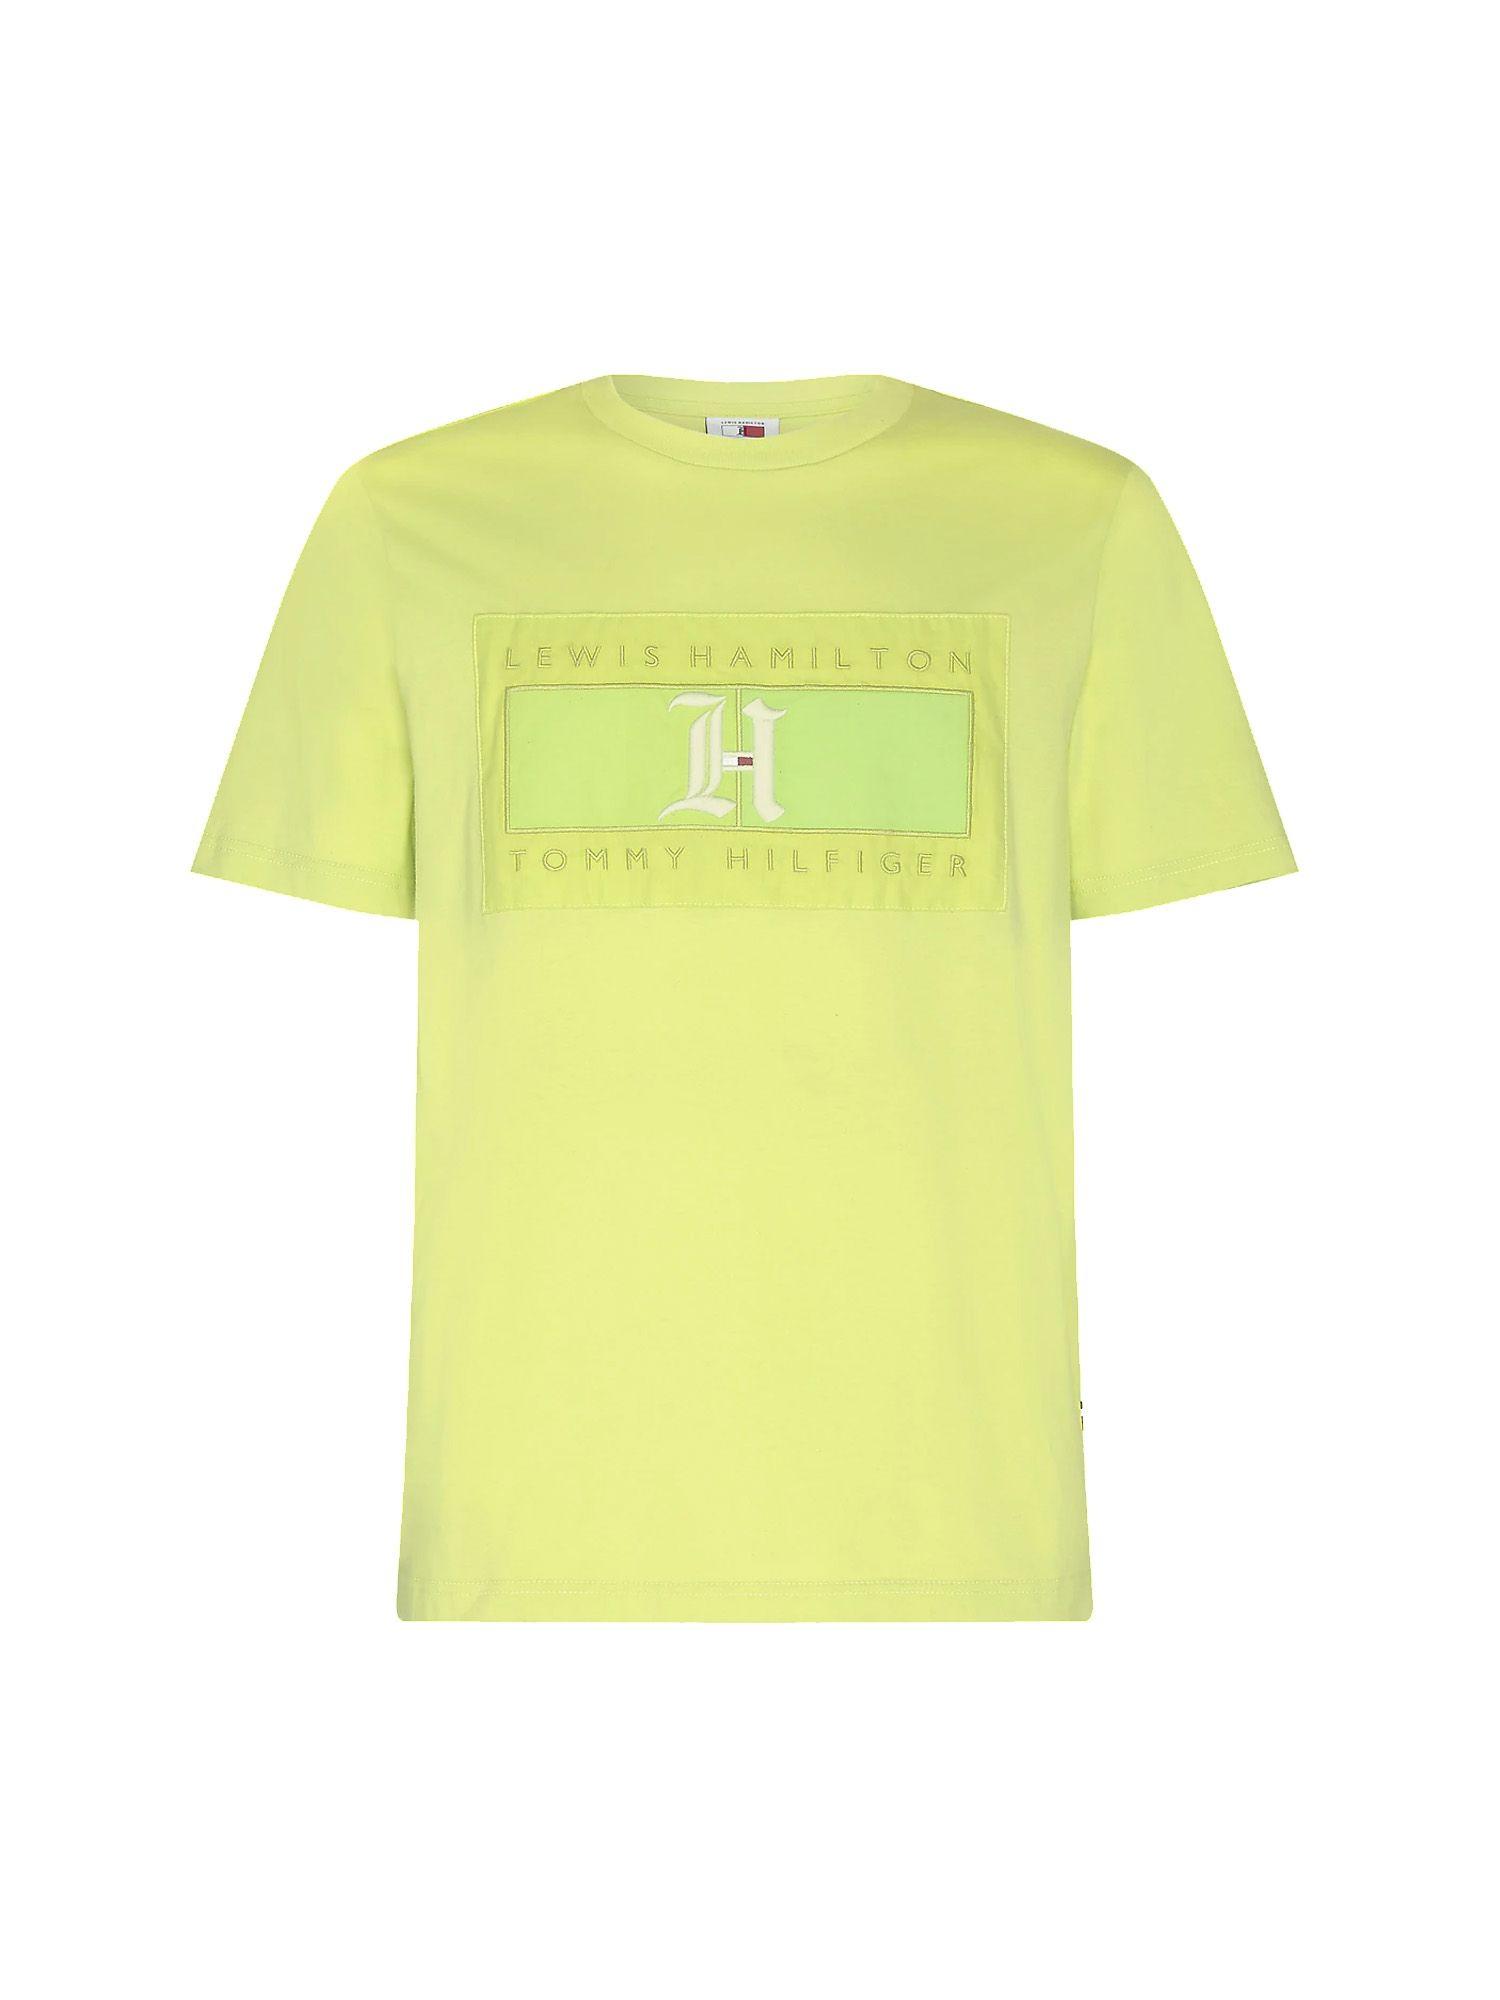 Tommy Hilfiger Cotton T-shirt in Yellow for Men - Lyst